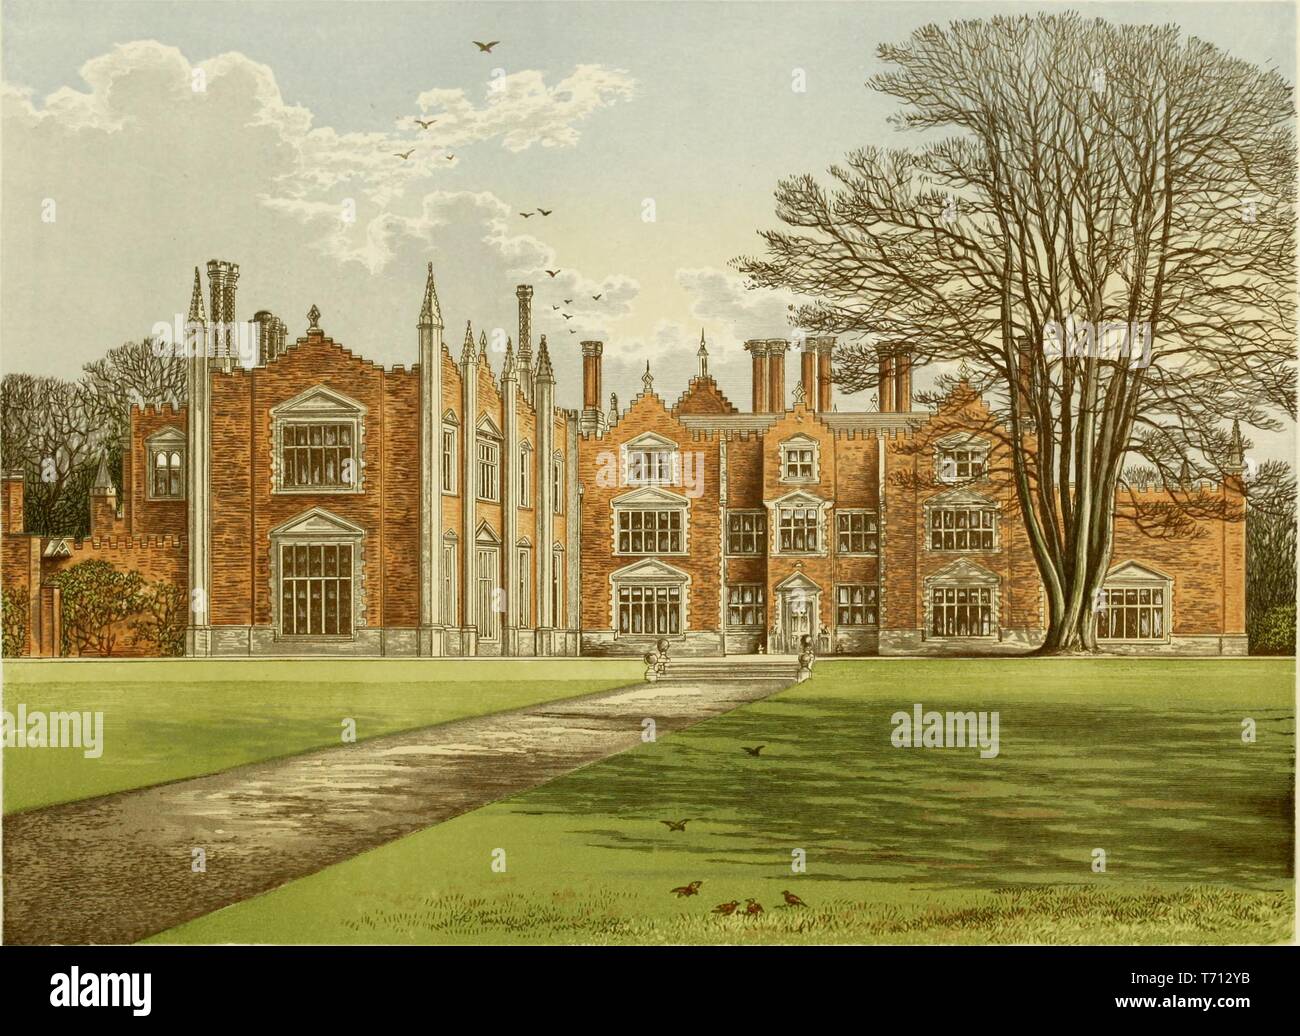 Color print depicting a green lawn with a path leading to Great Witchingham Hall, a 16th or 17th-century country house, with a brick and stone facade, located in Norfolk, England, published in FO (Francis Orpen) Morris's 'A series of picturesque views of seats of the noblemen and gentlemen of Great Britain and Ireland, with descriptive and historical letterpress', 1840. Courtesy Internet Archive. () Stock Photo